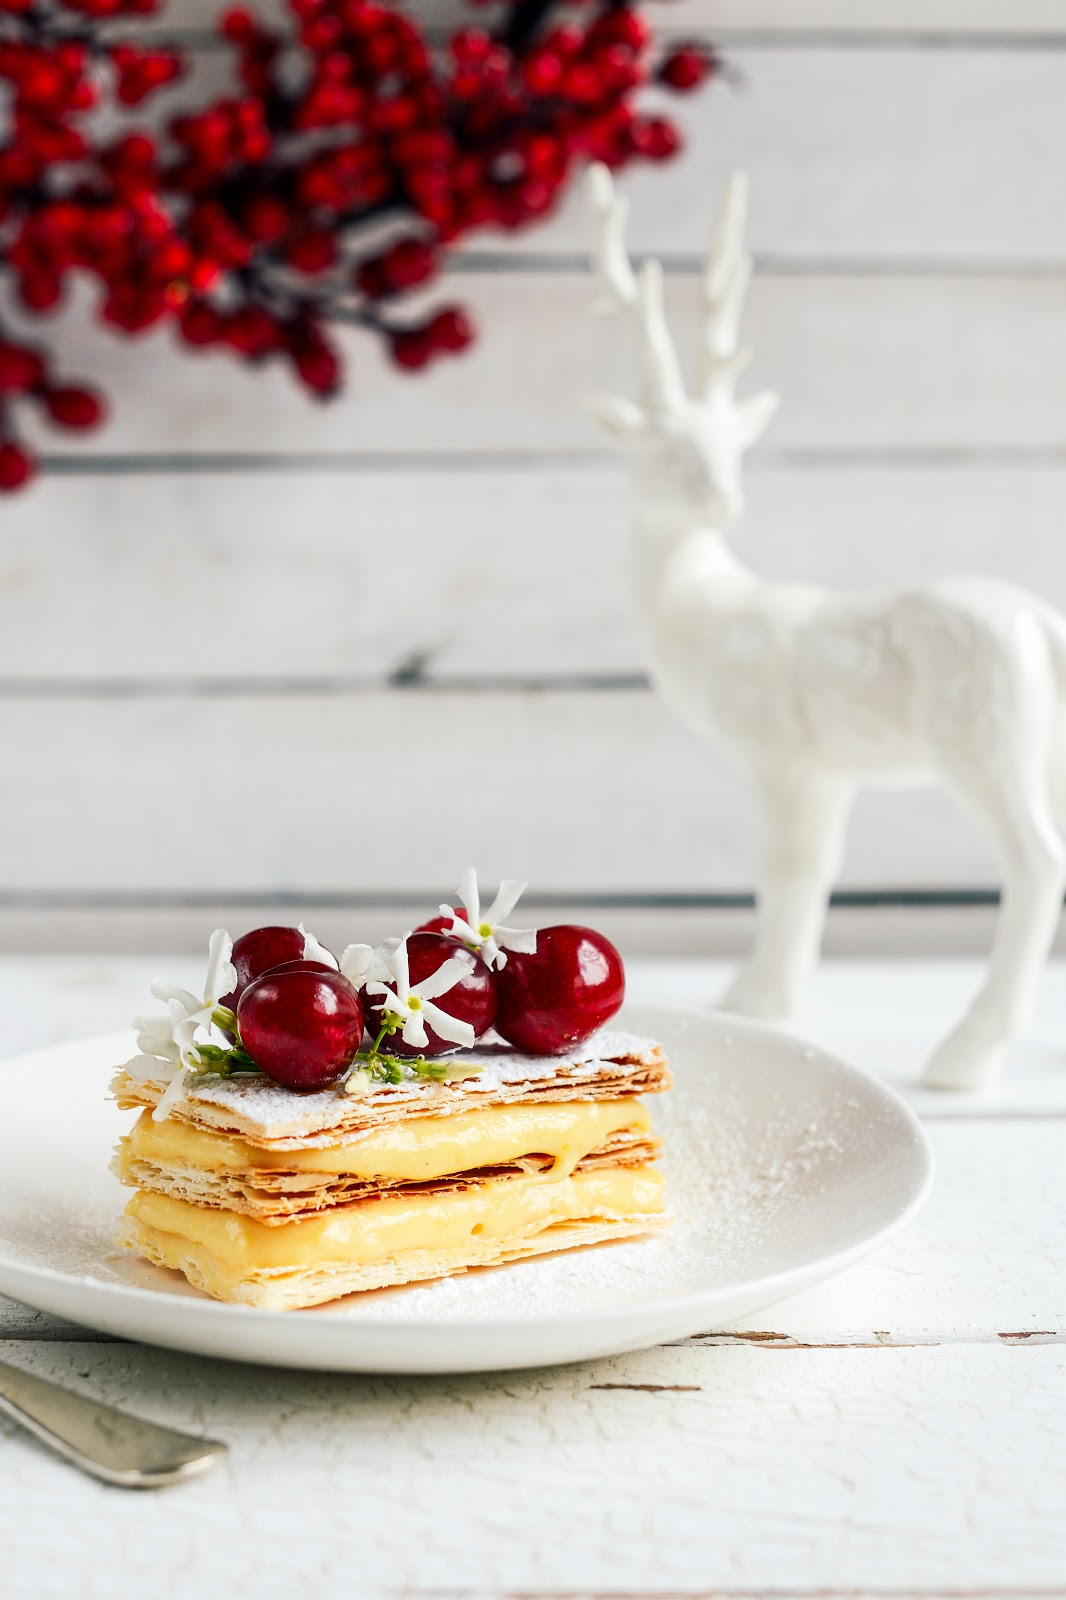 Project Fairytale: Cristmas Millefeuille Cake